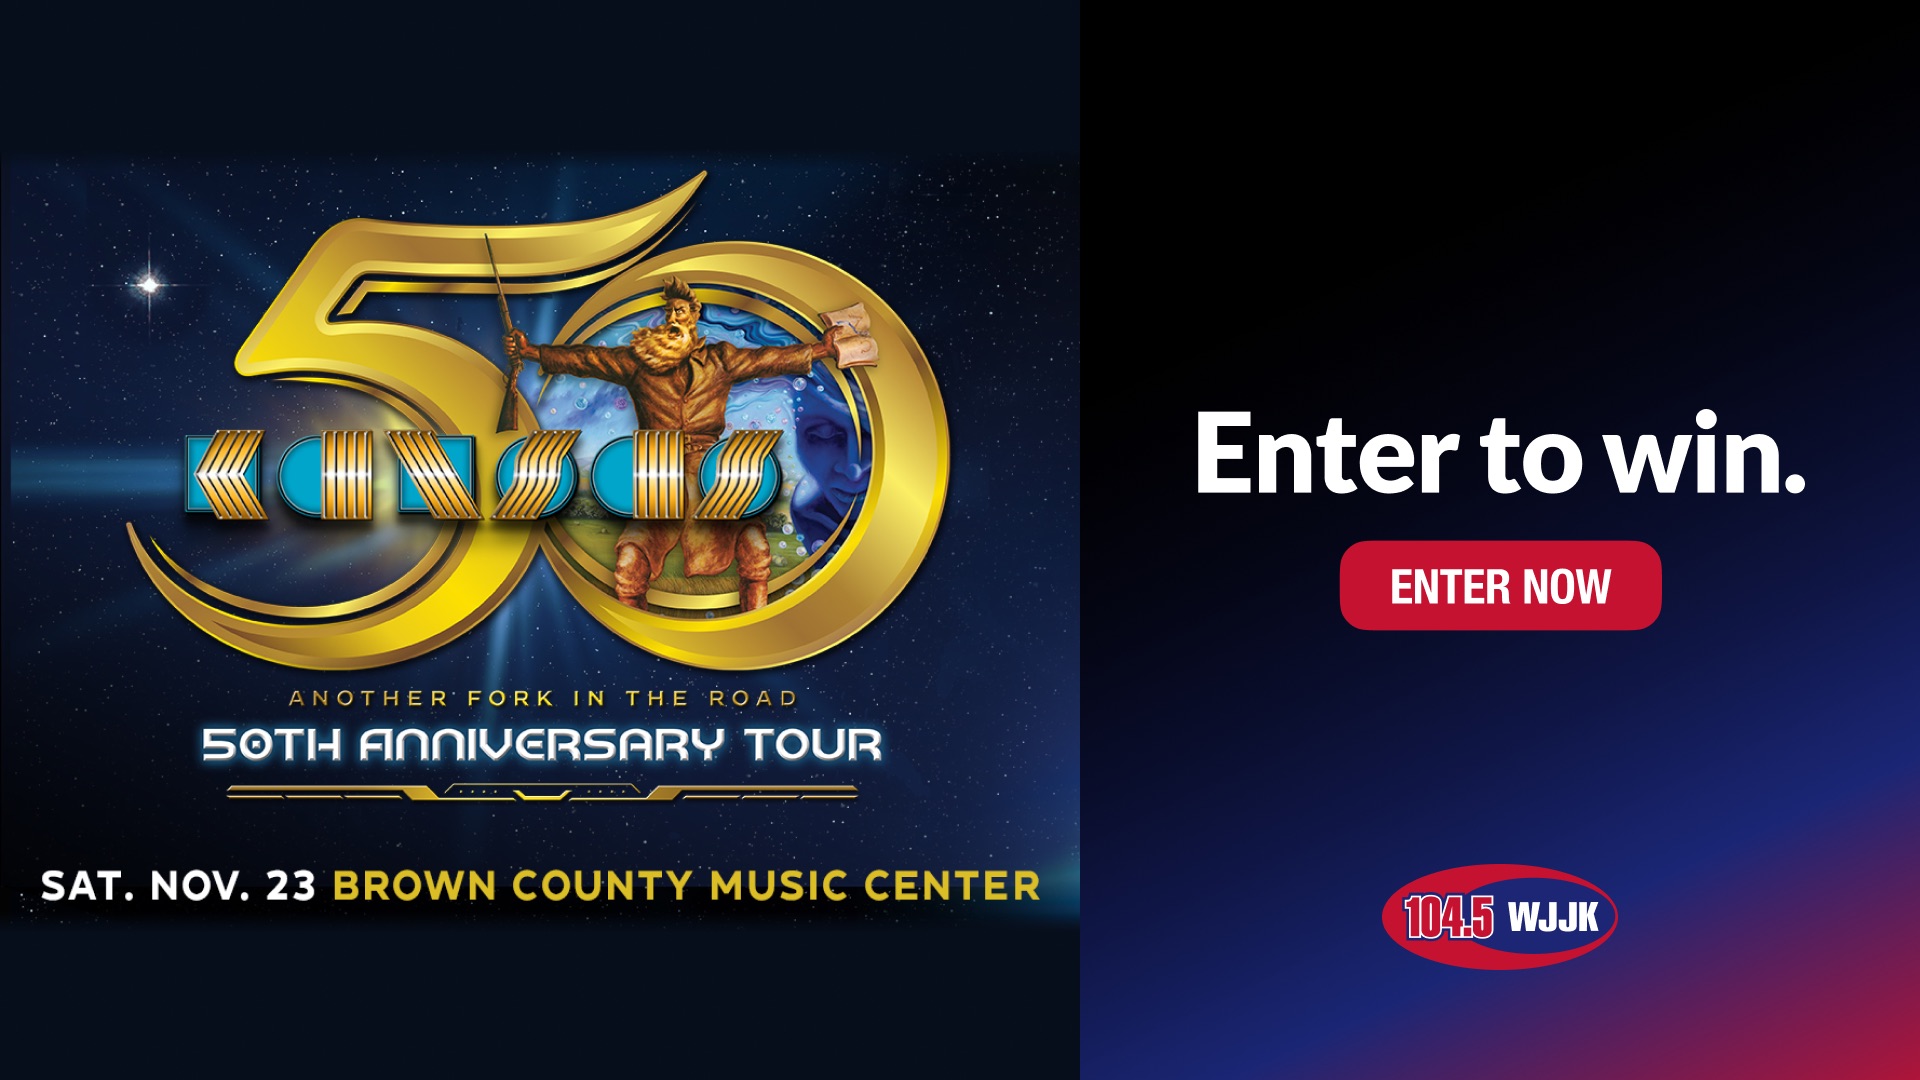 Enter To Win Tickets to See Kansas